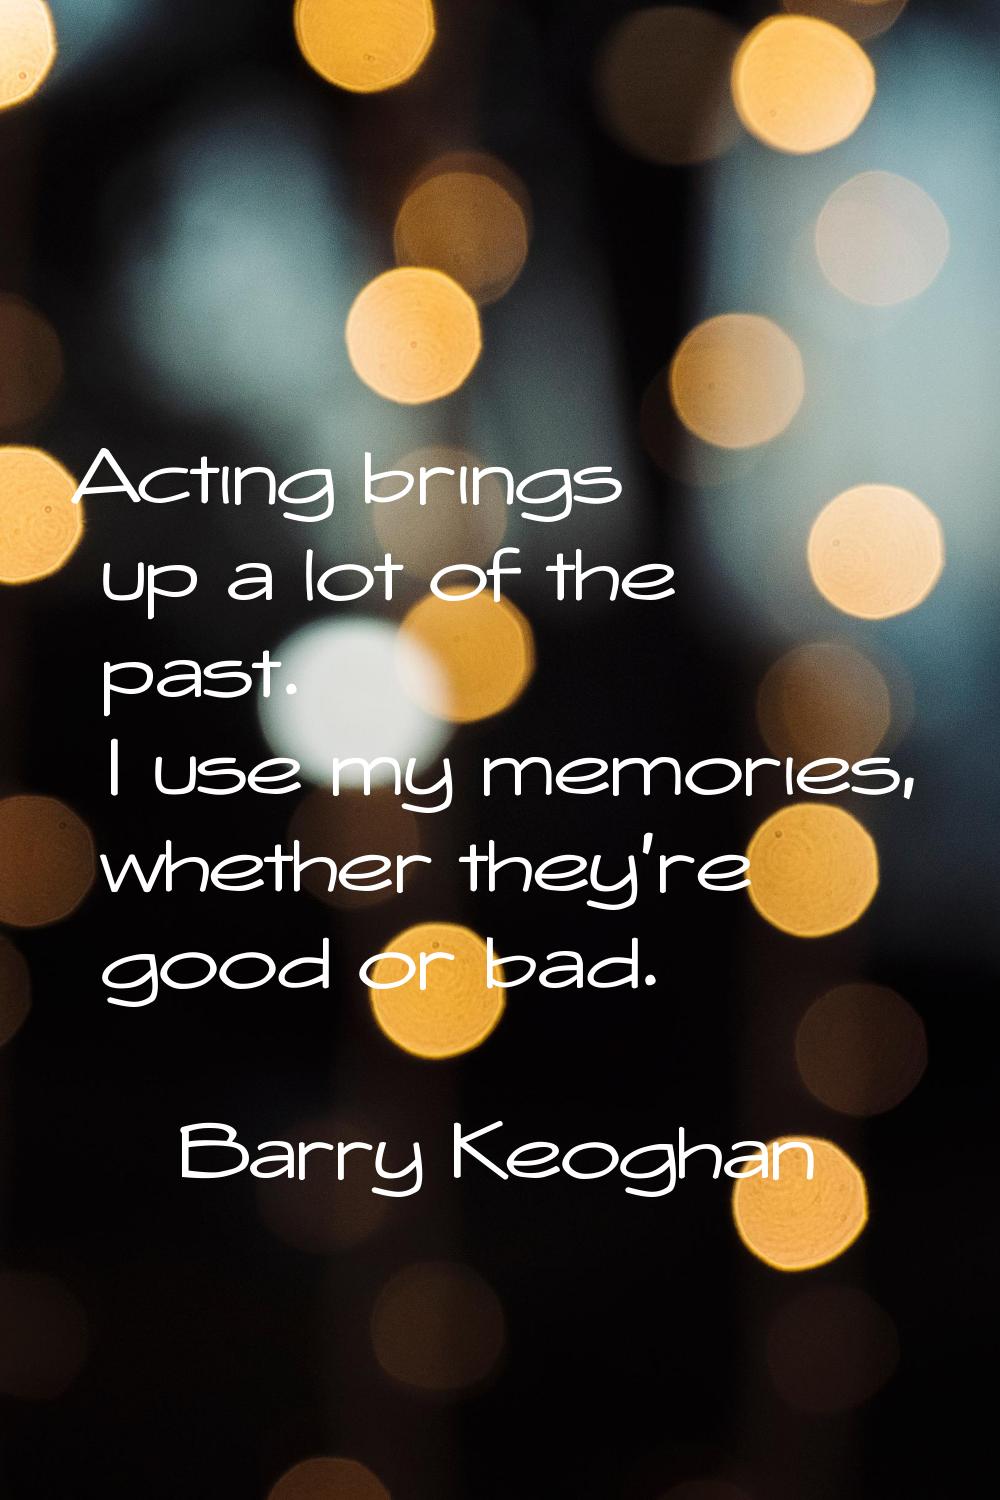 Acting brings up a lot of the past. I use my memories, whether they're good or bad.